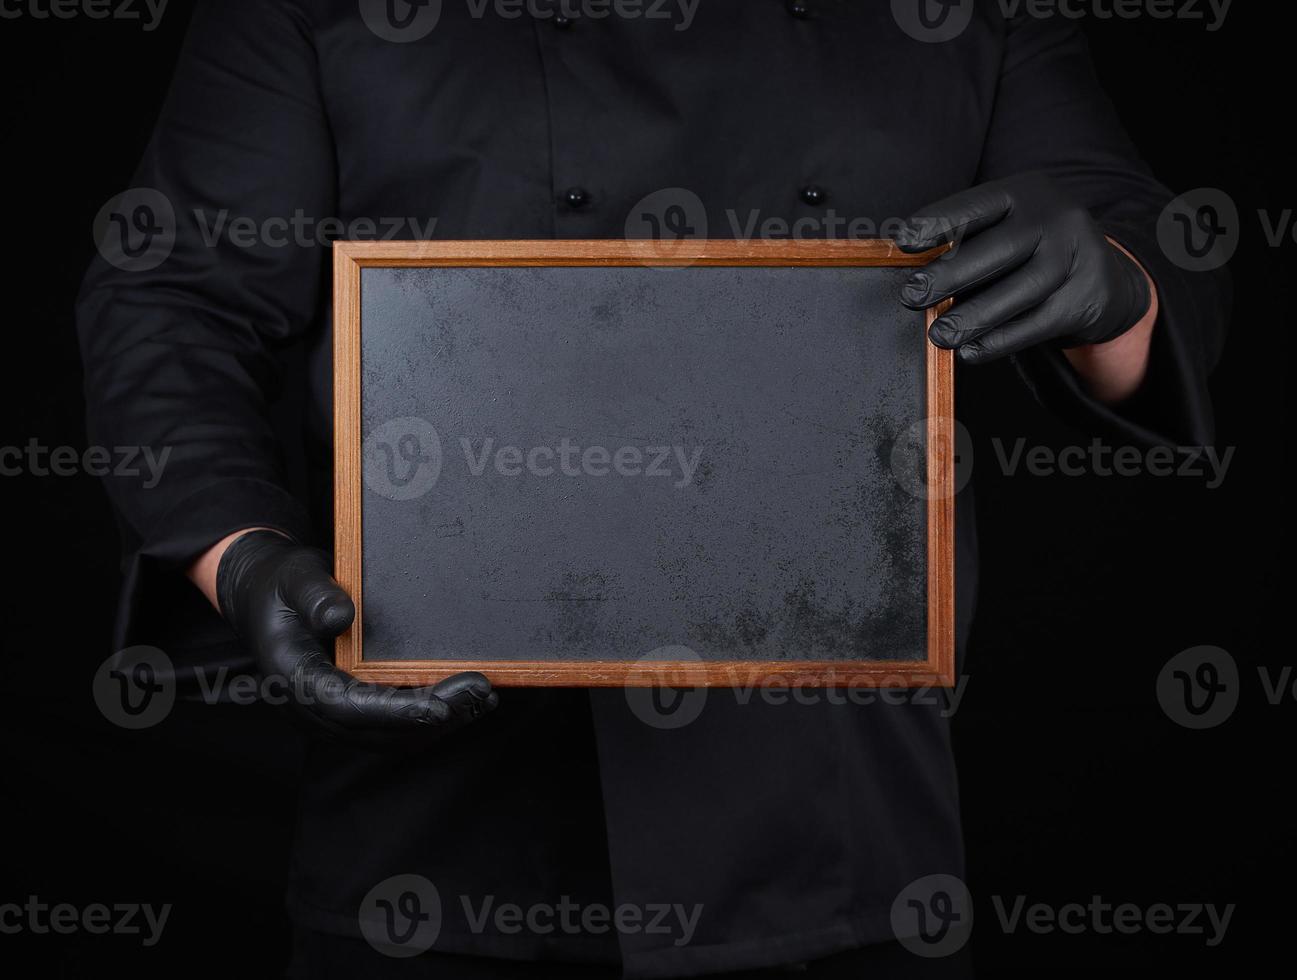 chef in black uniform  holds an empty wooden frame photo